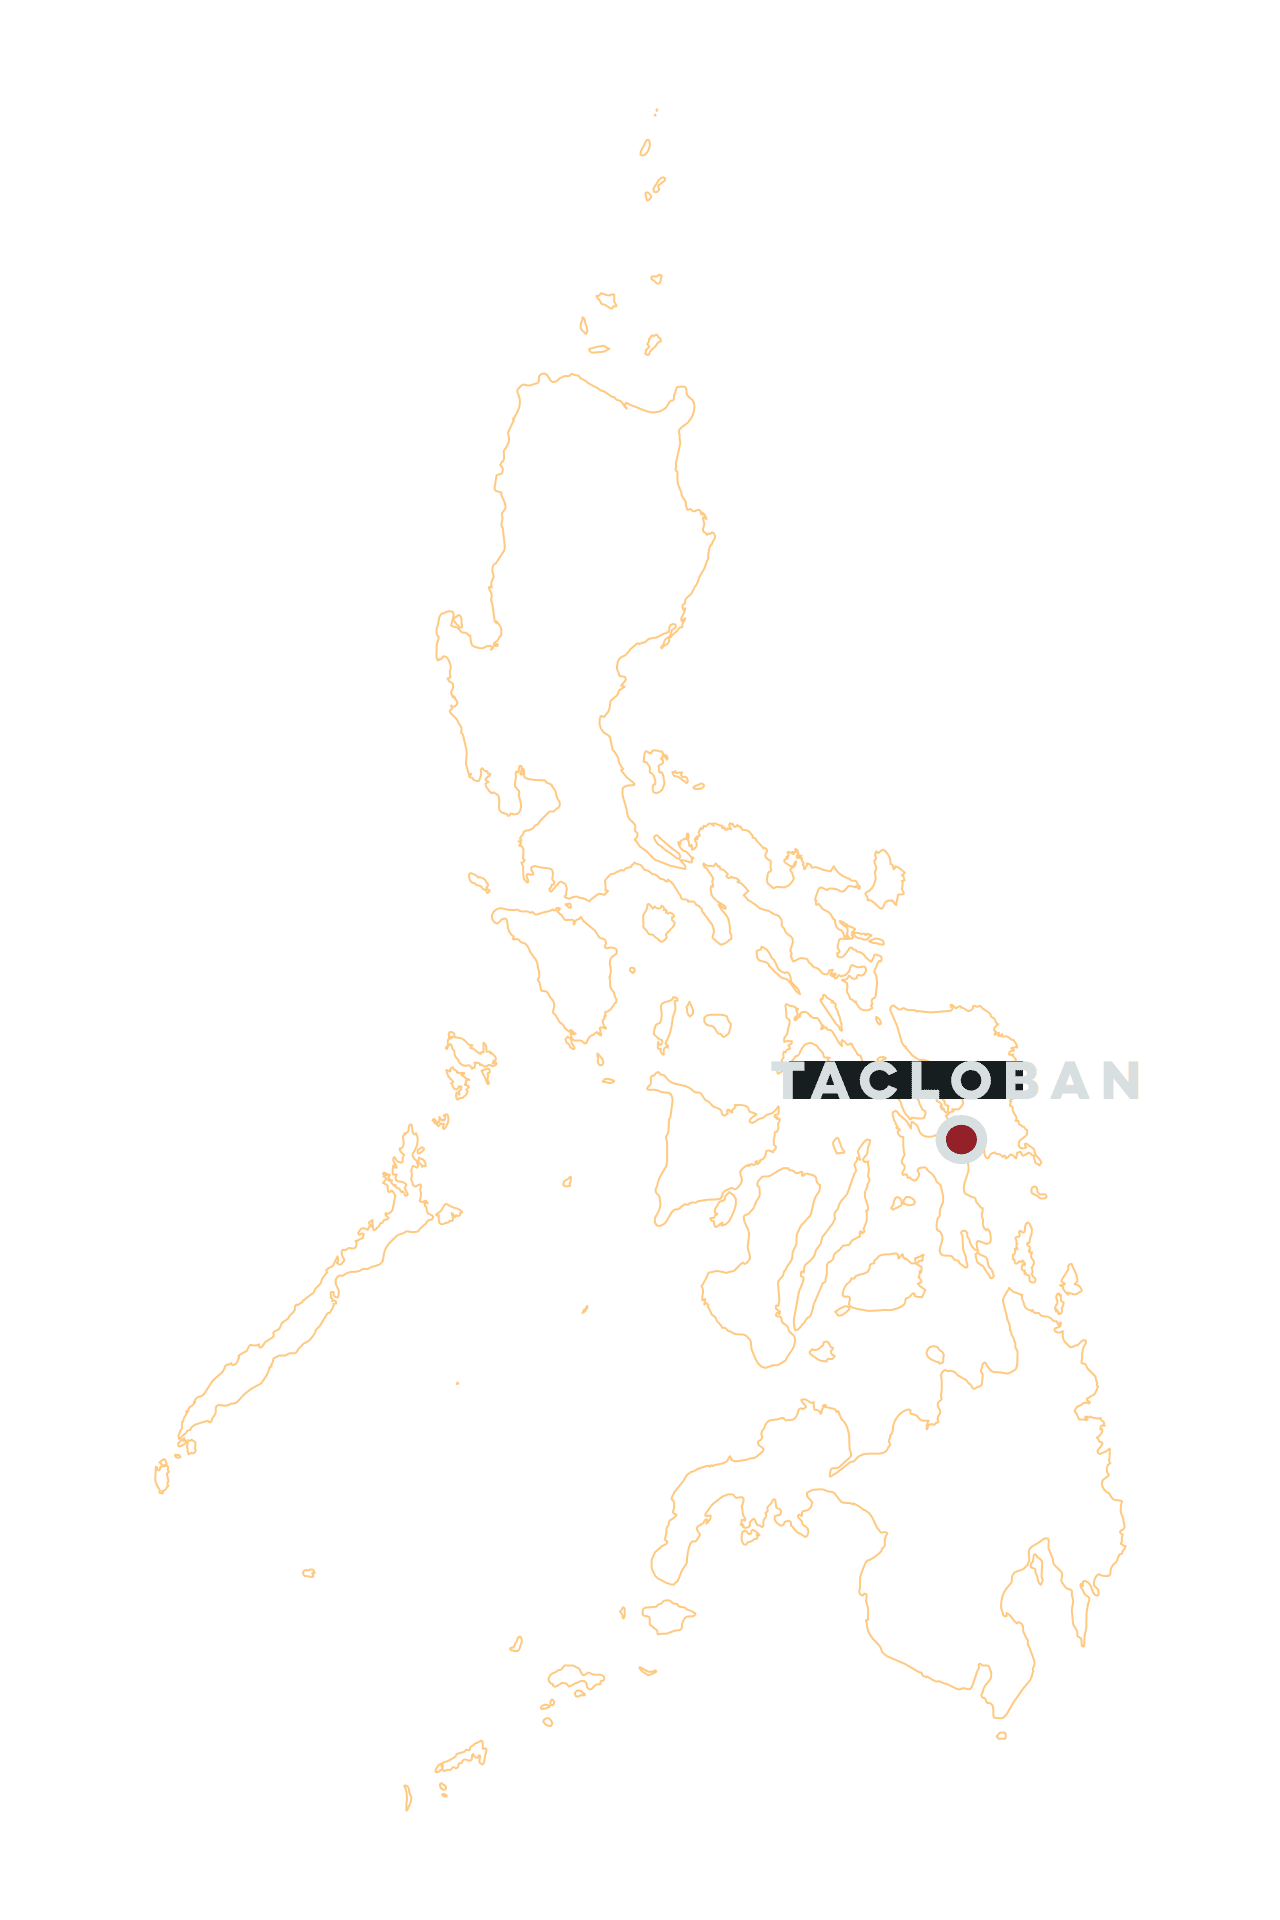 Map of the Philippines with Tacloban highlighted